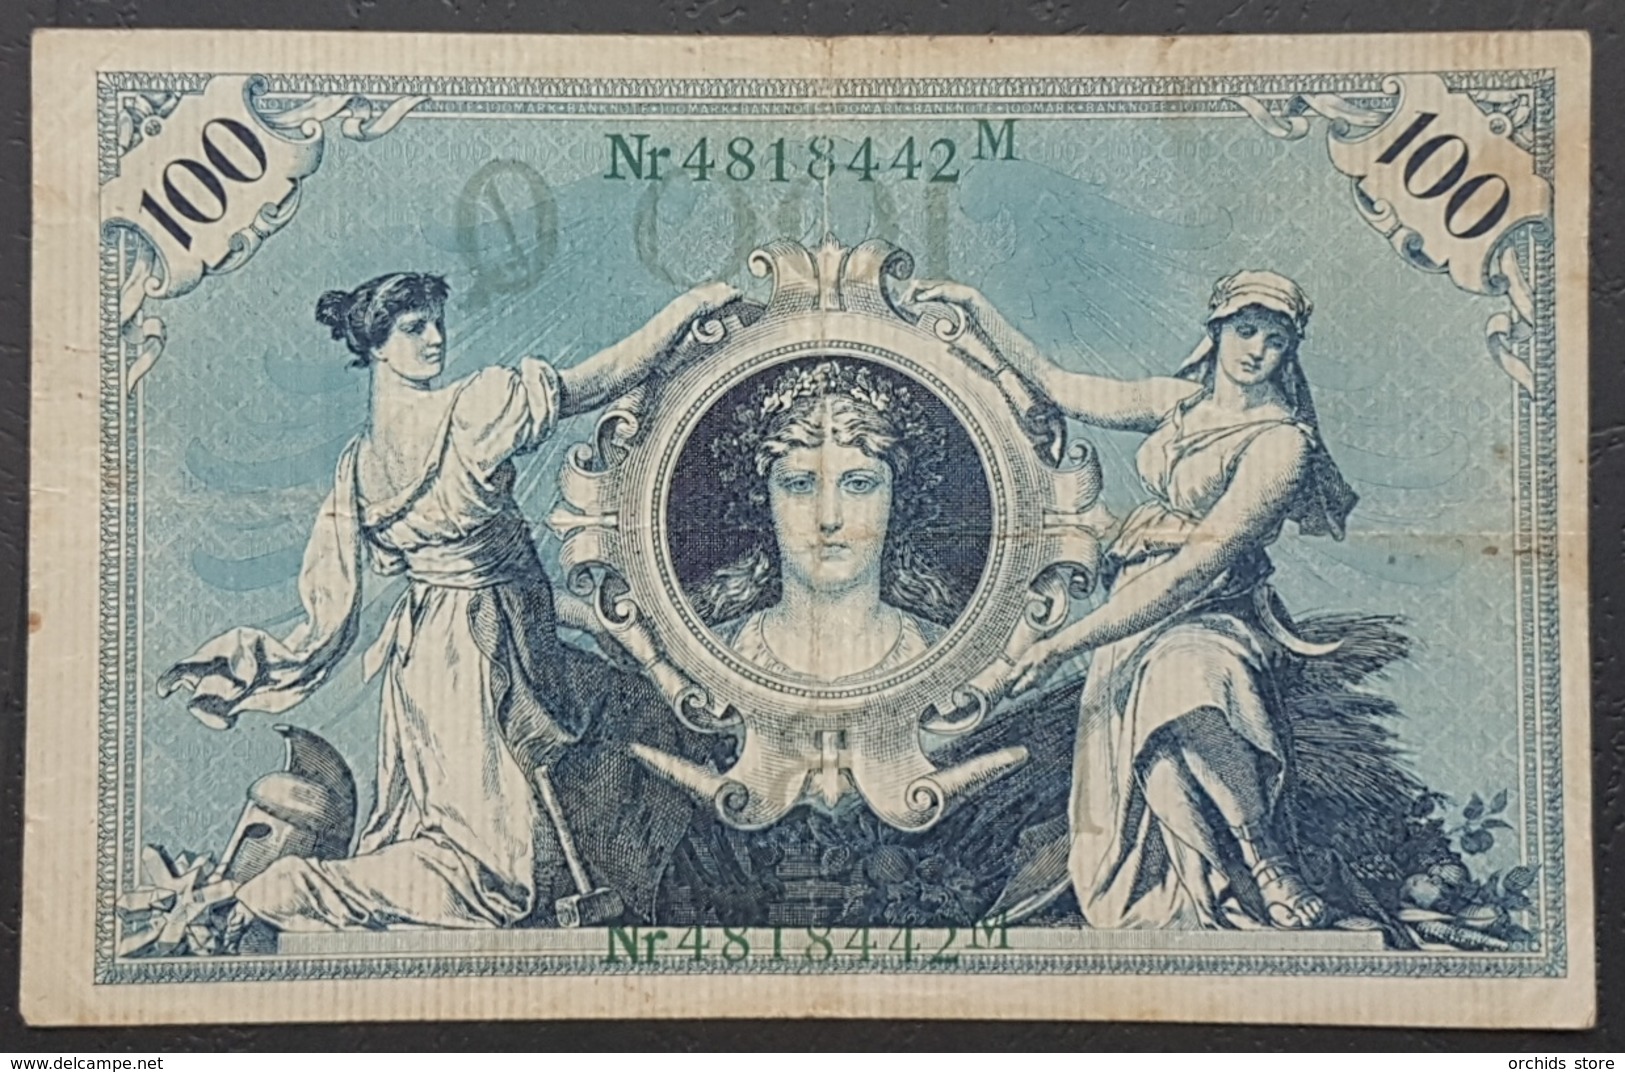 EBN12 - Germany 1908 Banknote 100 Reichsmark Pick #34 Green Seal #Nr4818442M - 100 Mark